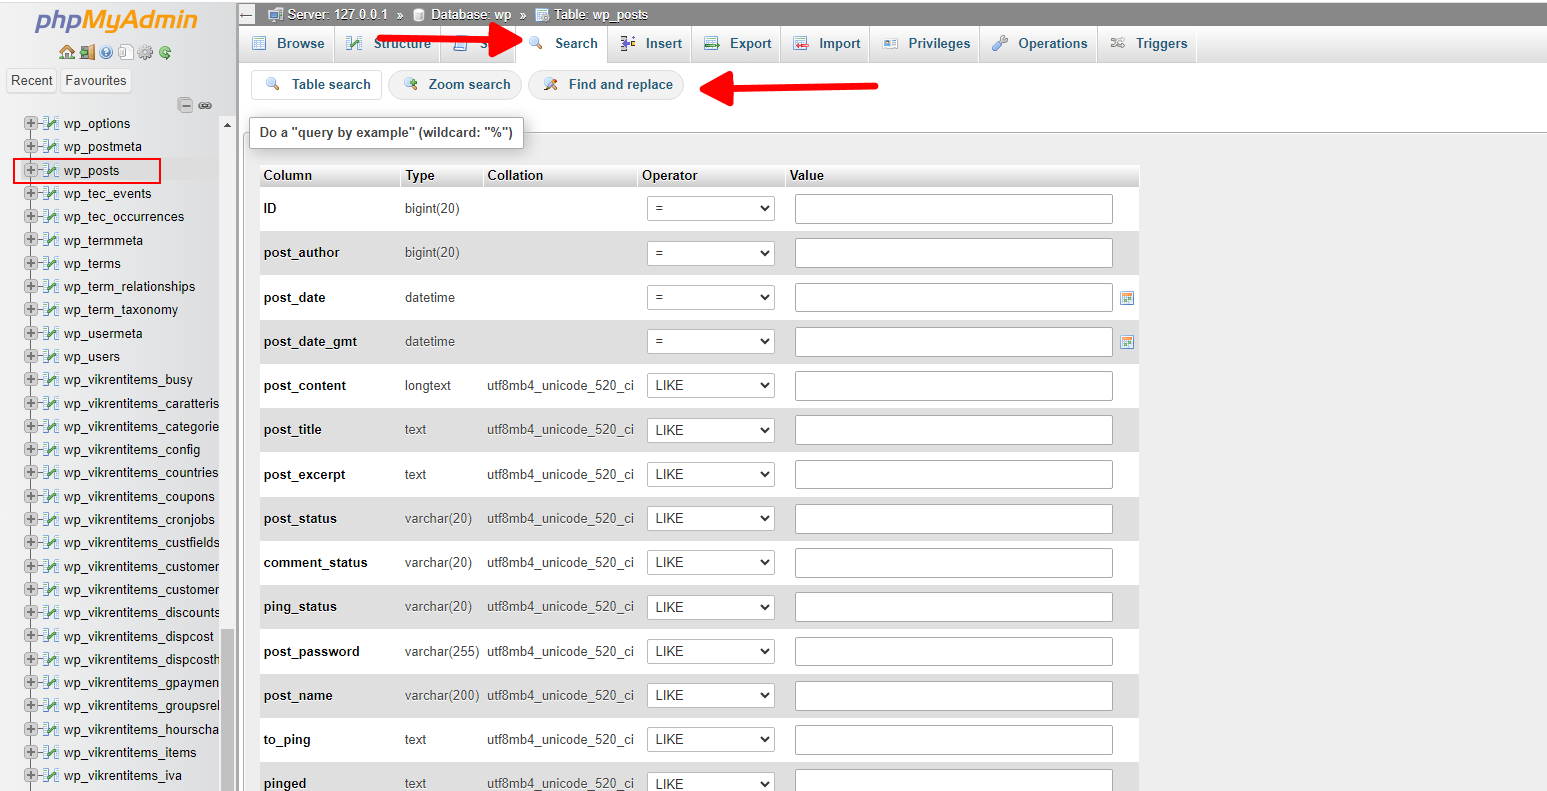 Screenshot of the Find and Replace button in the PHPMyAdmin database management panel.